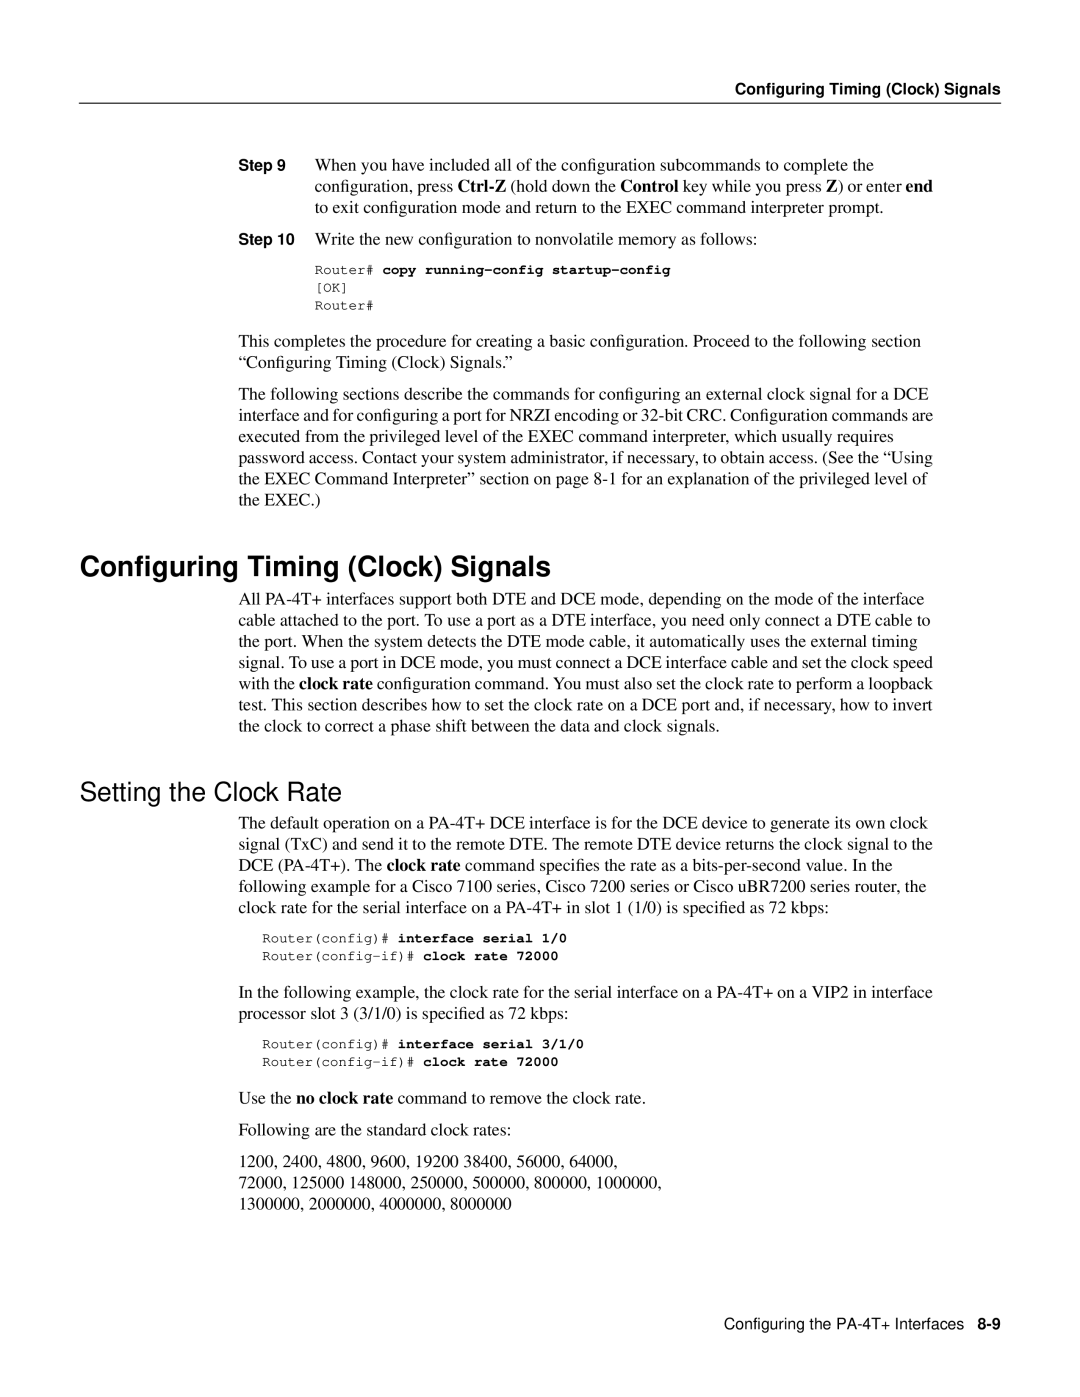 Cisco Systems PA-4T manual Conﬁguring Timing Clock Signals, Setting the Clock Rate 